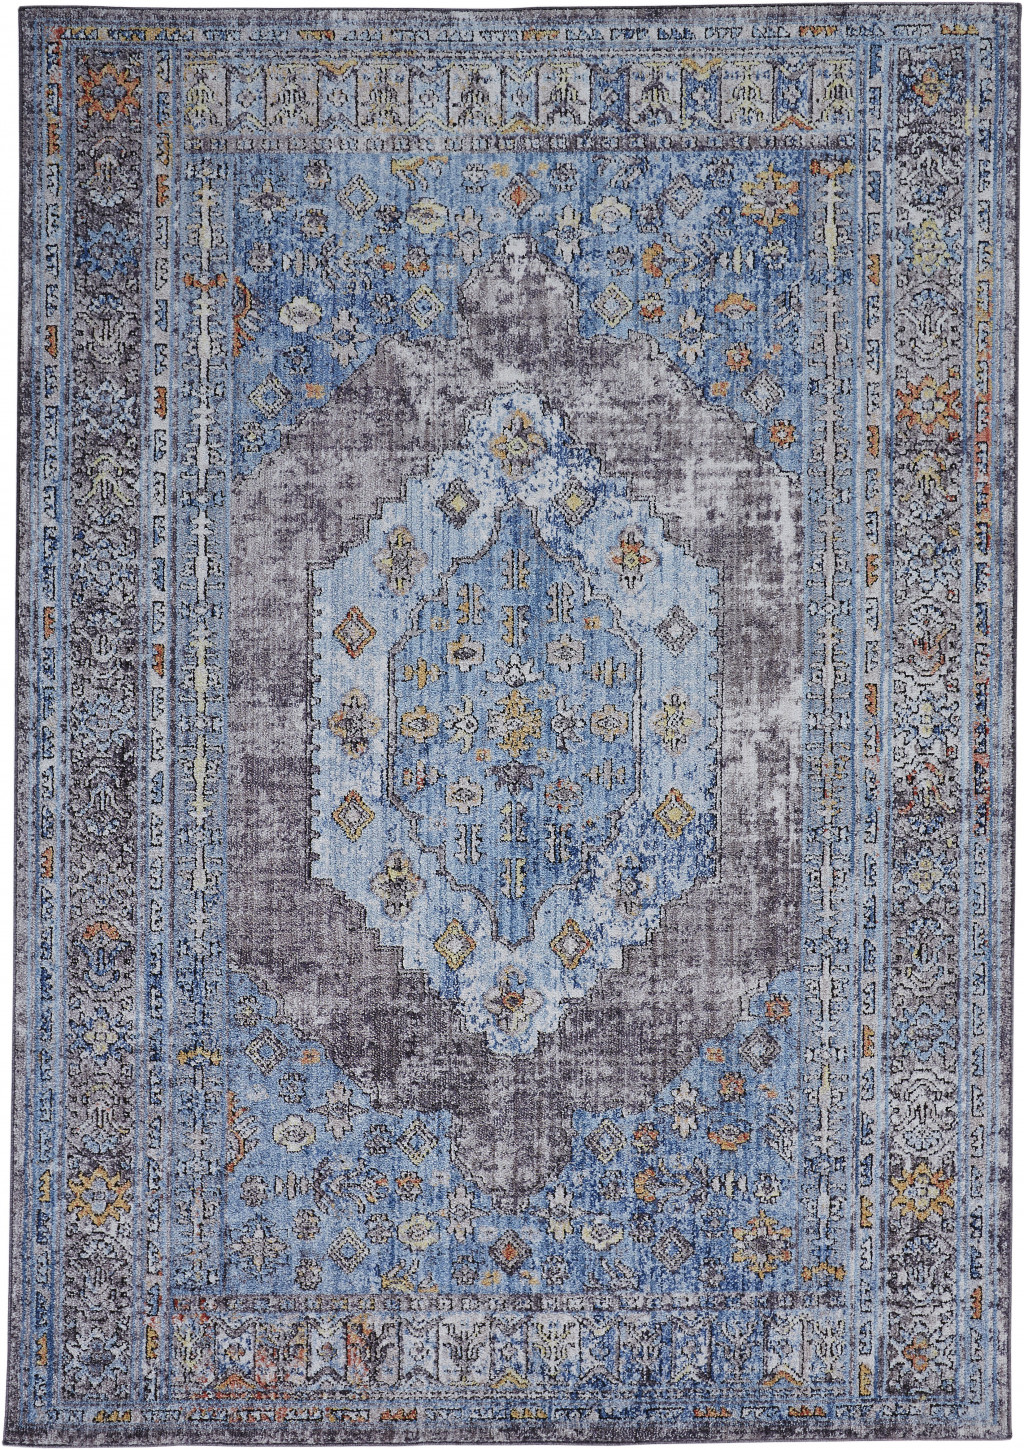 7' X 10' Blue Gray And Gold Floral Stain Resistant Area Rug-512339-1